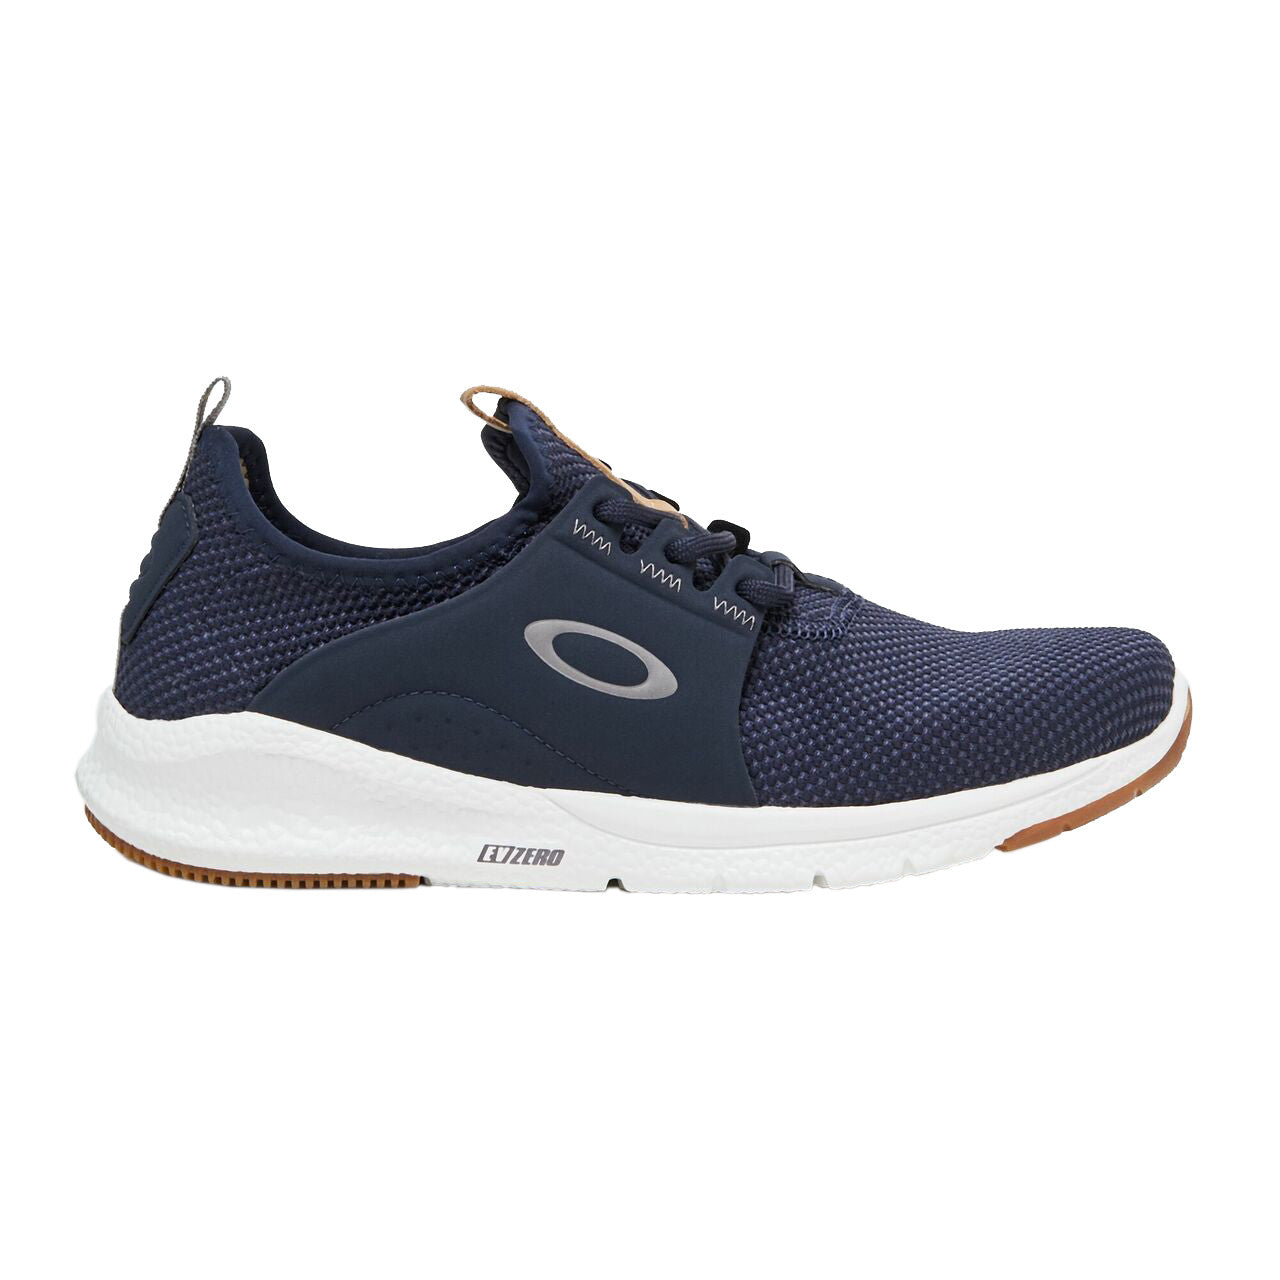 Oakley Dry Trainers Navy Blue